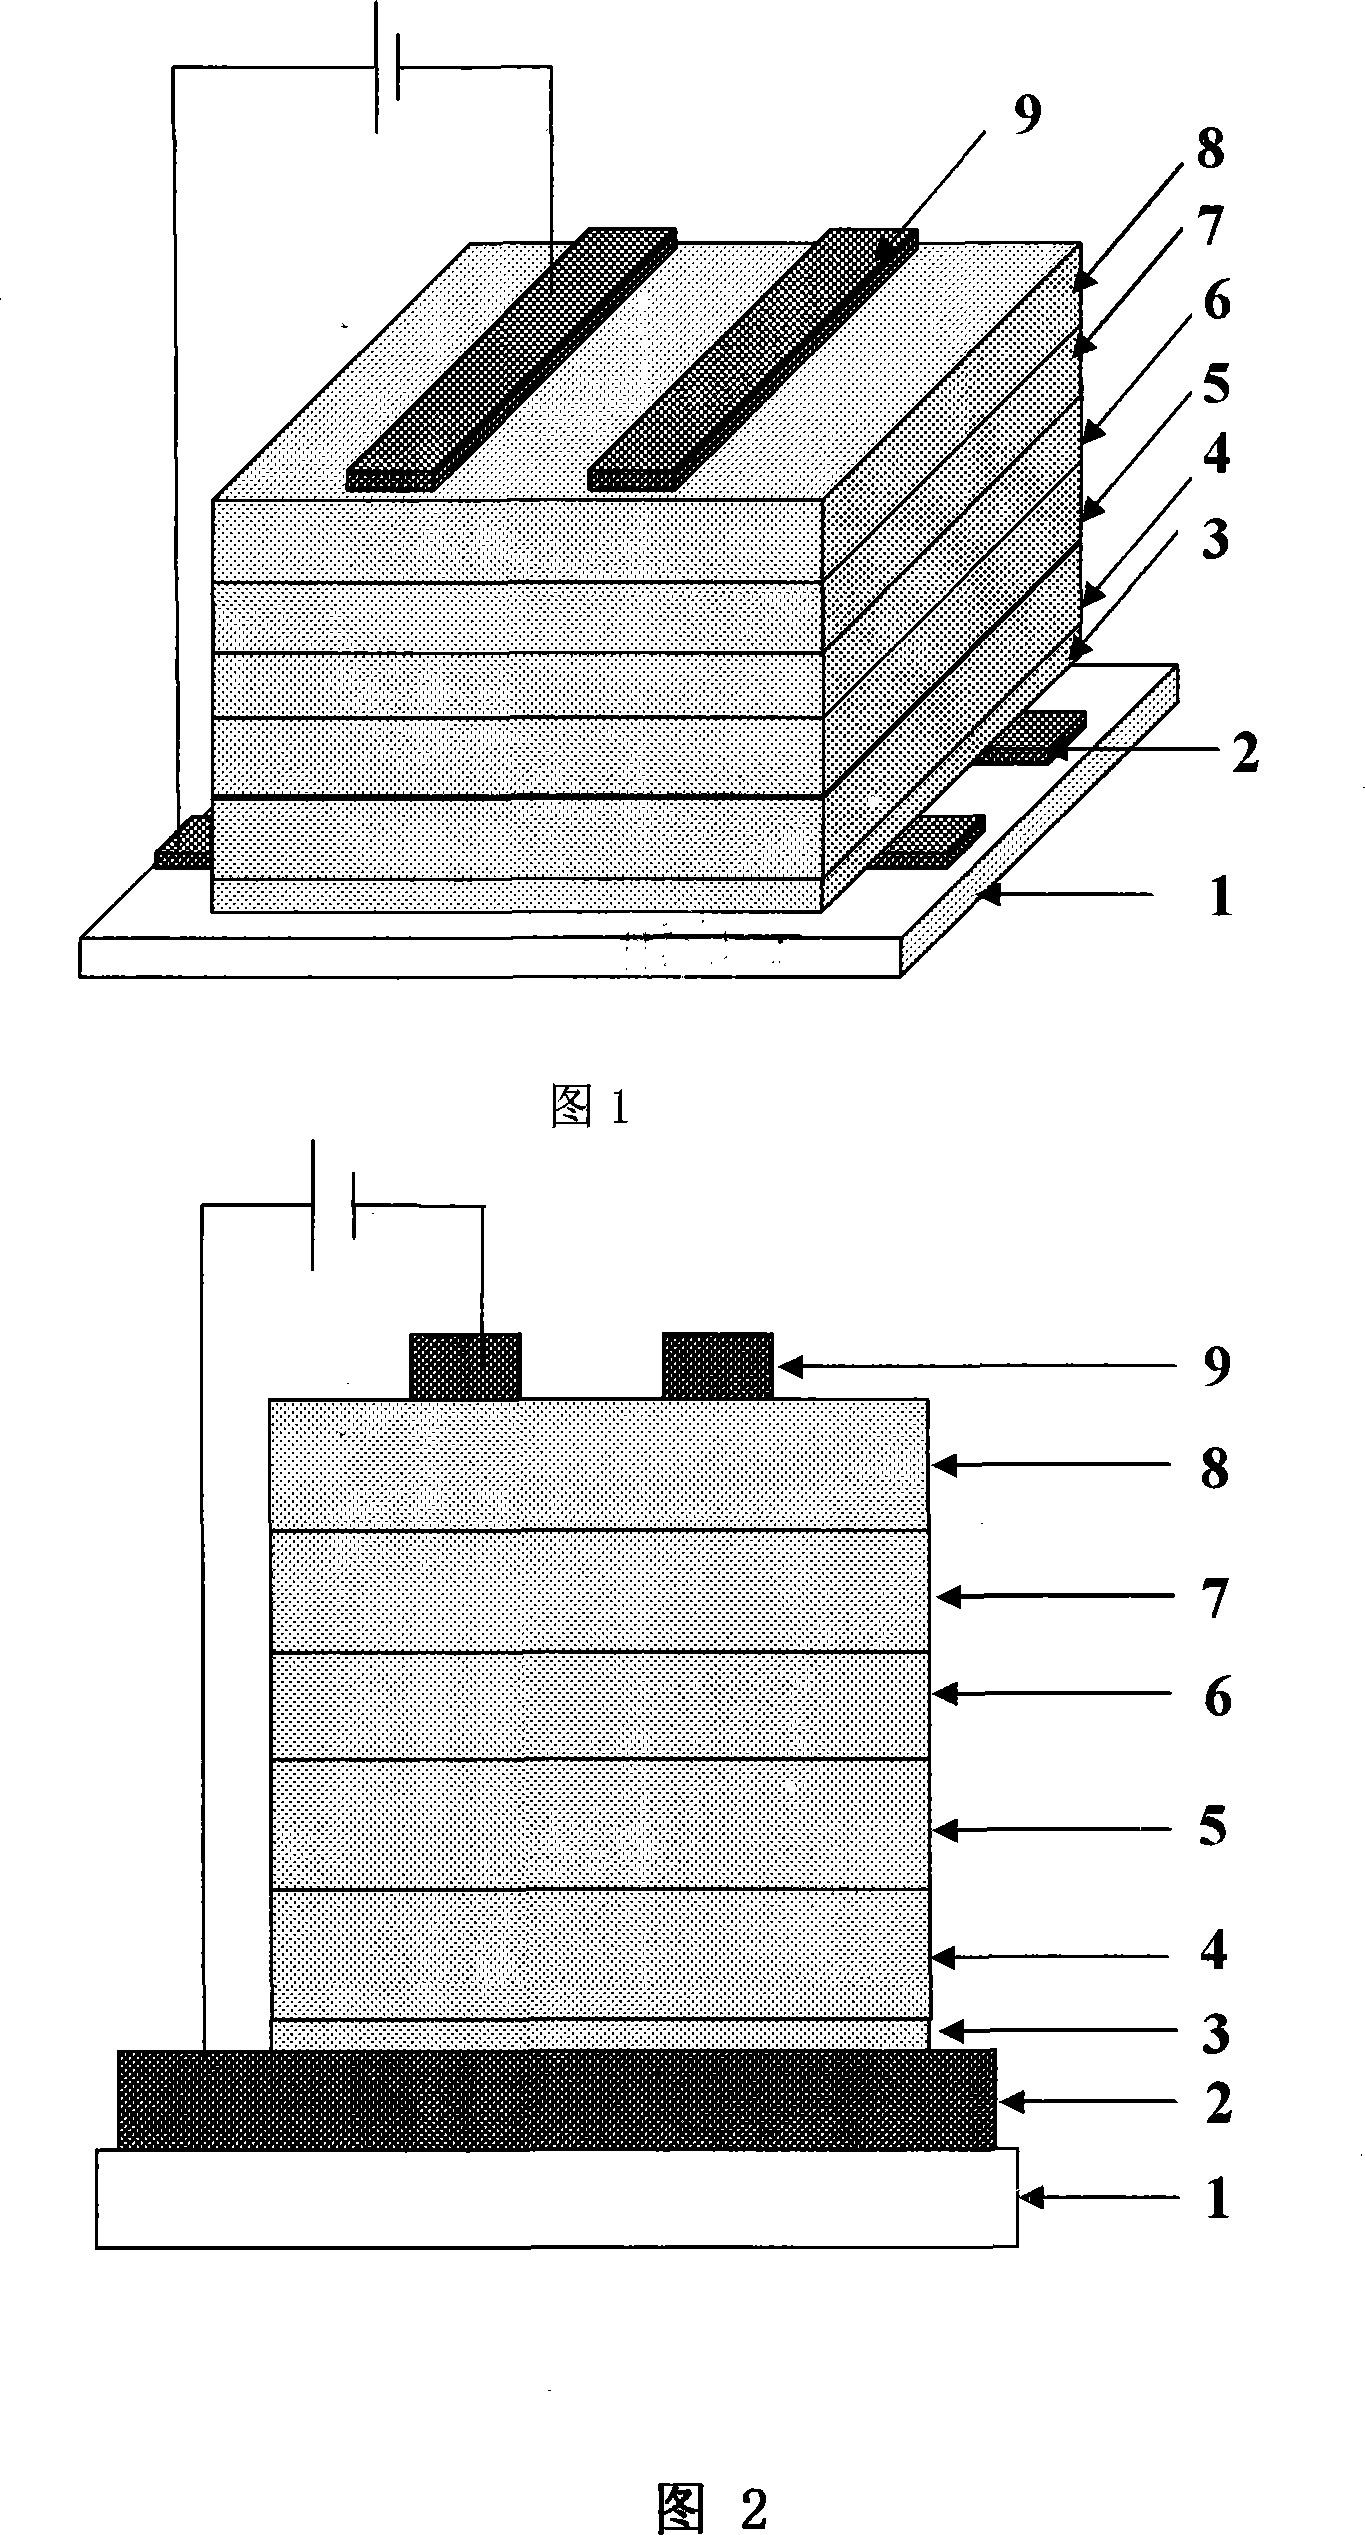 White light organic electroluminescent device and method for fabricating the same based on fluorochrome